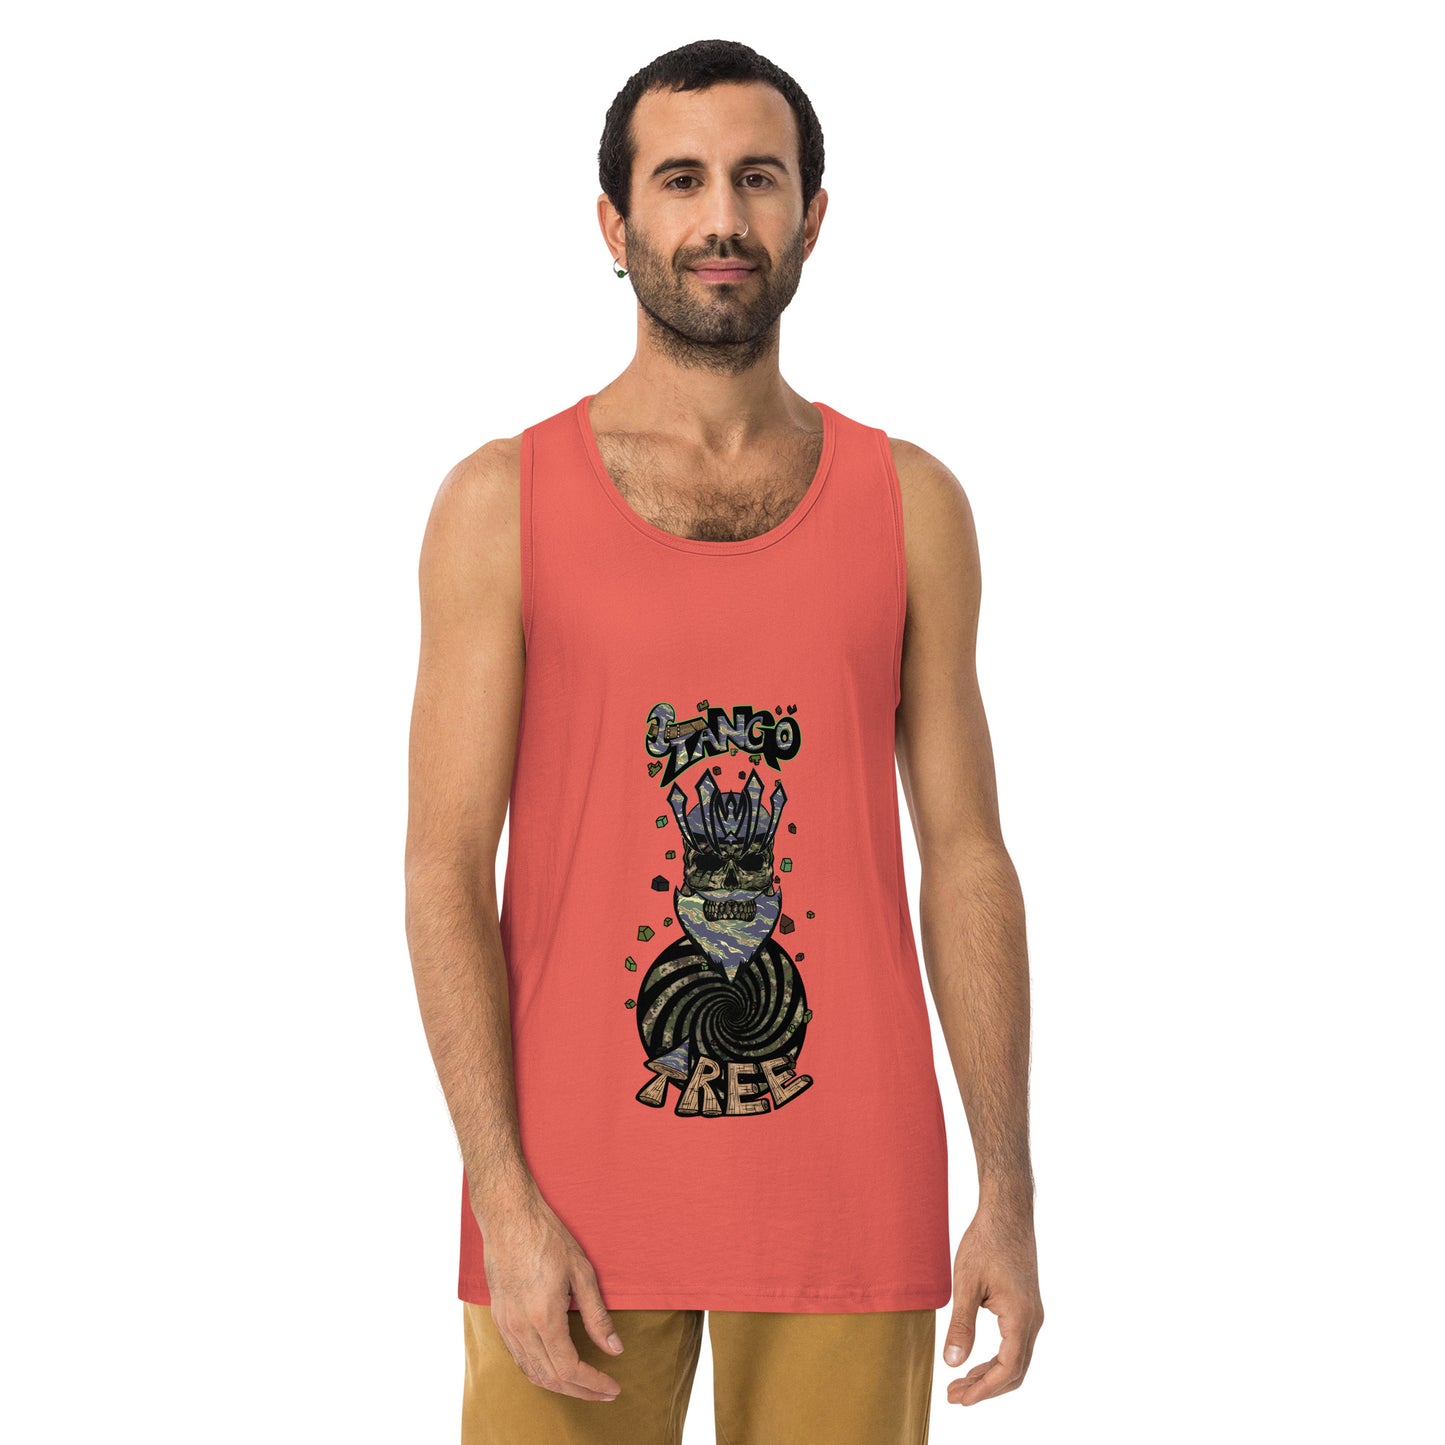 Heritage Men’s premium tank top "King Of The Vortex" Tiger Stripe Can't See Me Edition